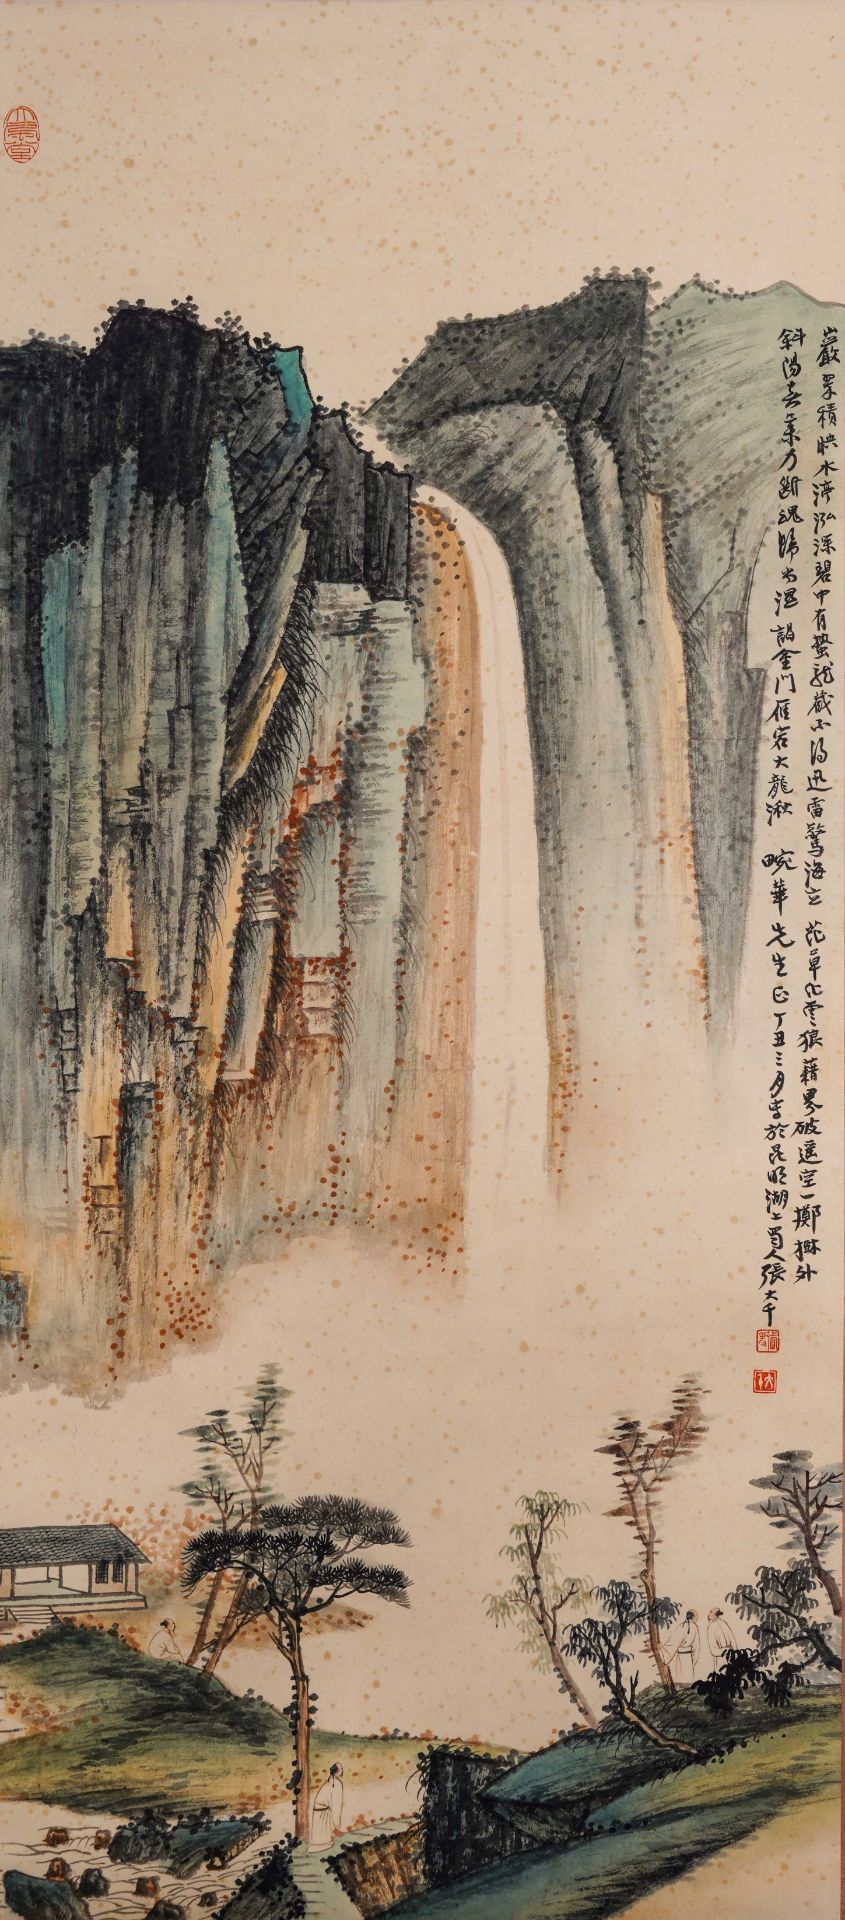 A Chinese Scroll Painting by Zhang Daqian - Image 2 of 8